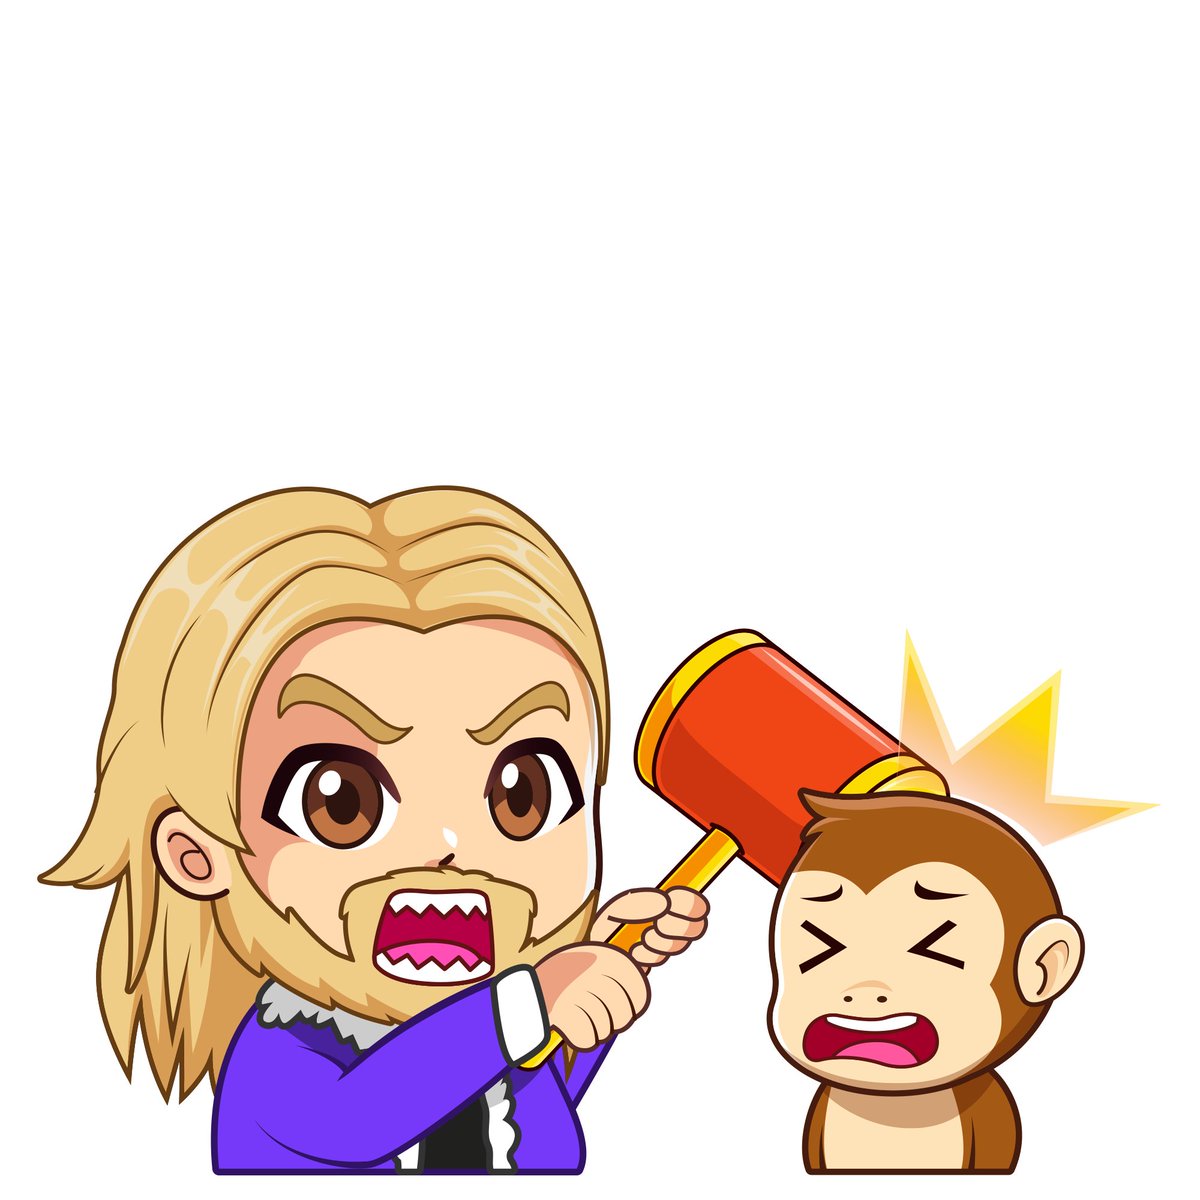 Loving the new chibi style art of zeus and thor! 

#Solana #SolanaNFTs #NFTs https://t.co/6osDAMn6HL